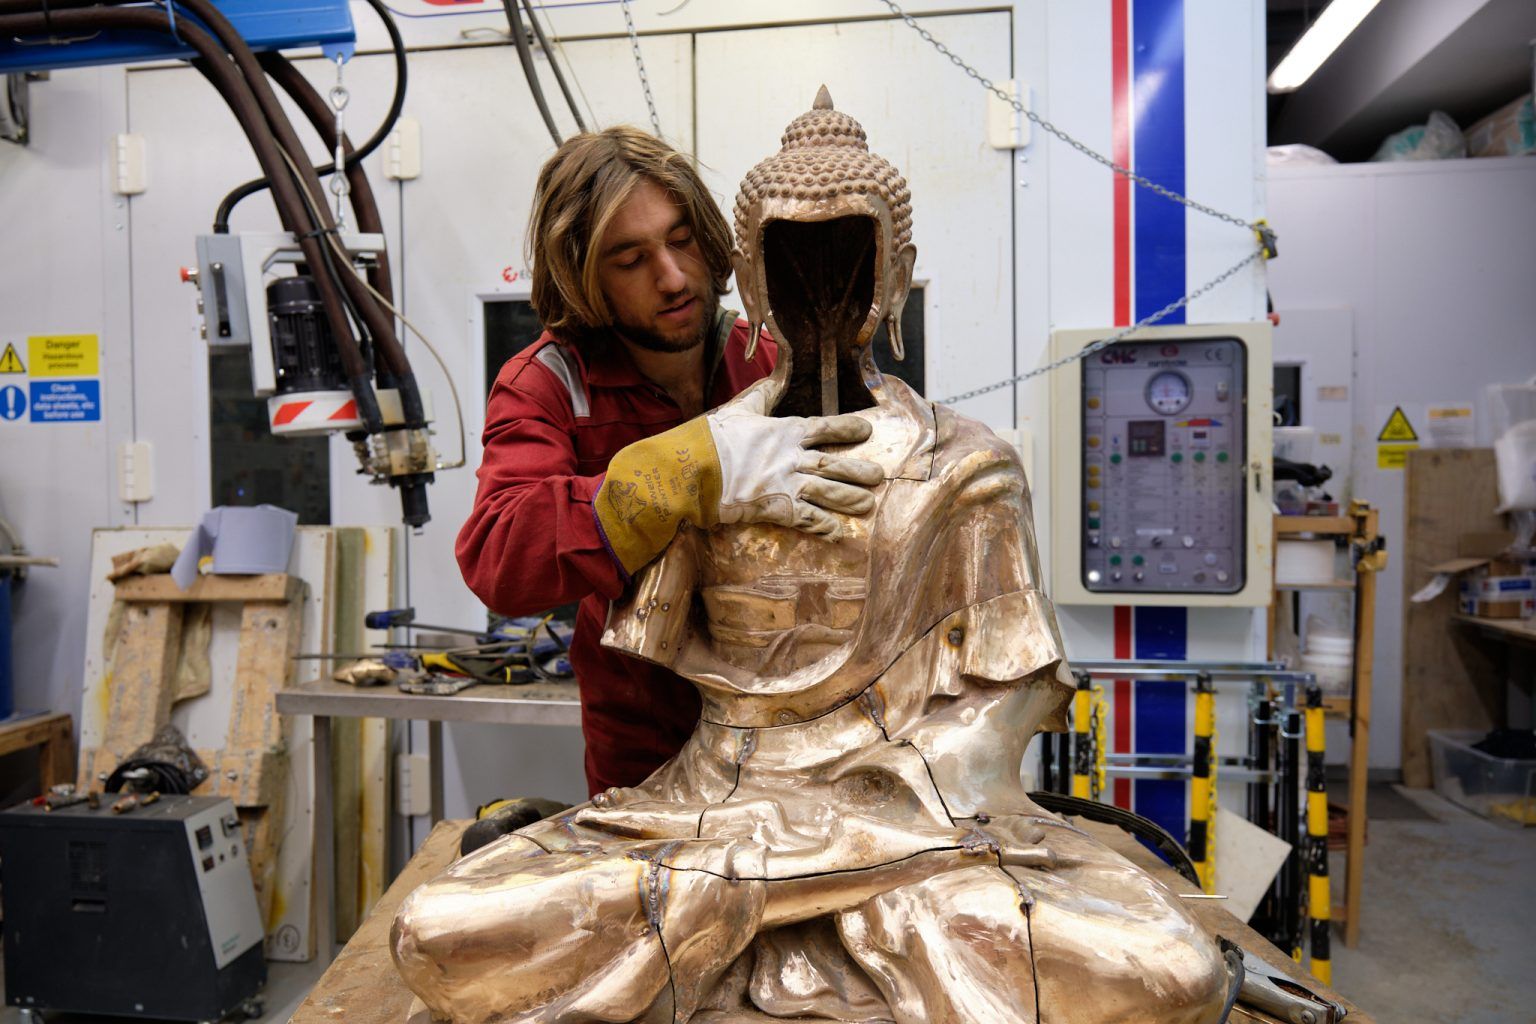 3. Metal statues project